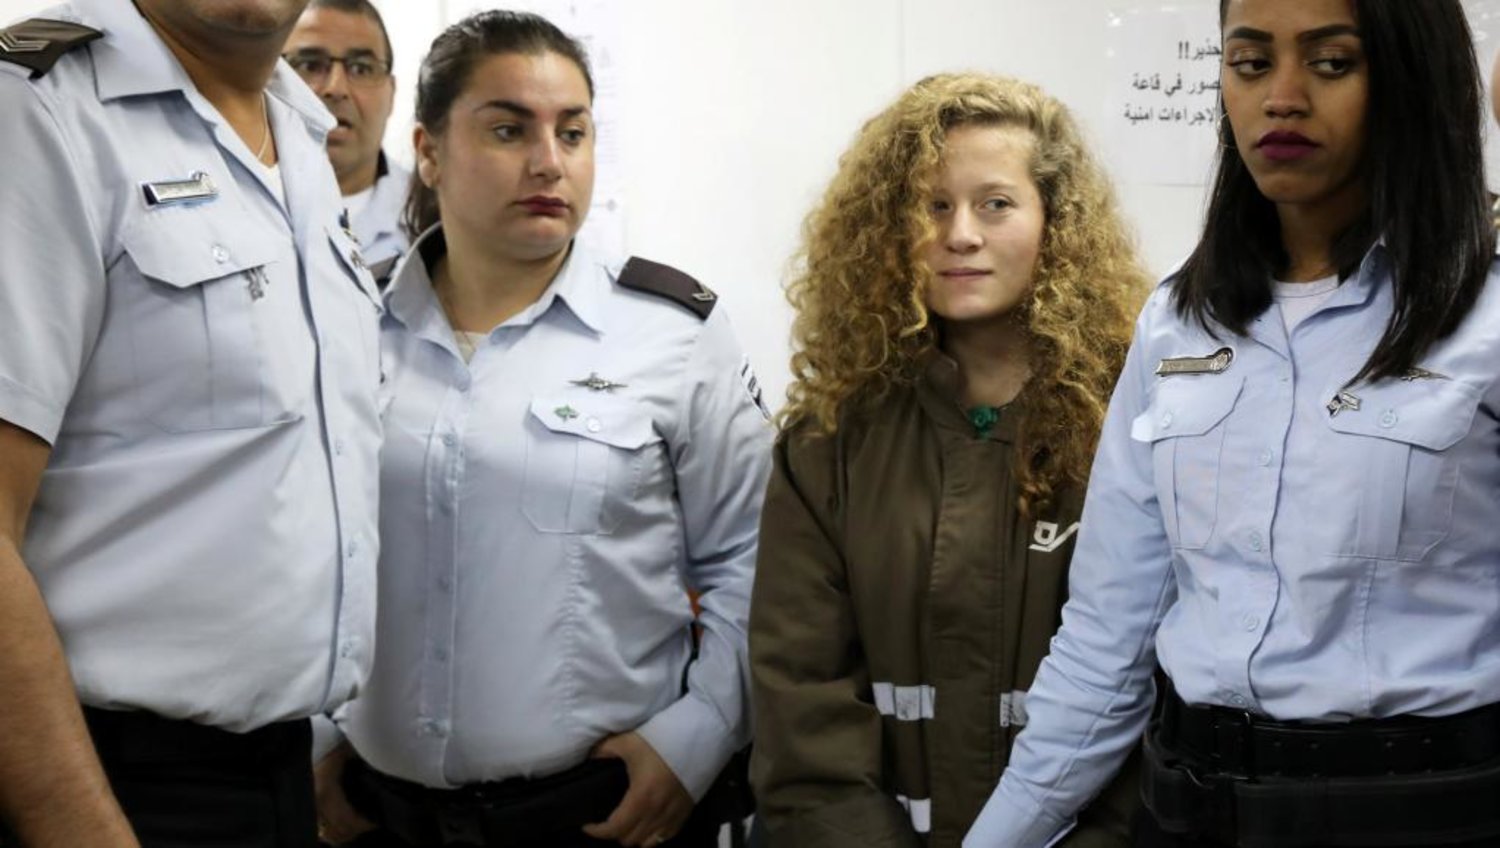 Palestinian teenager Ahed al-Tamimi appears before an Israeli court. (Reuters)